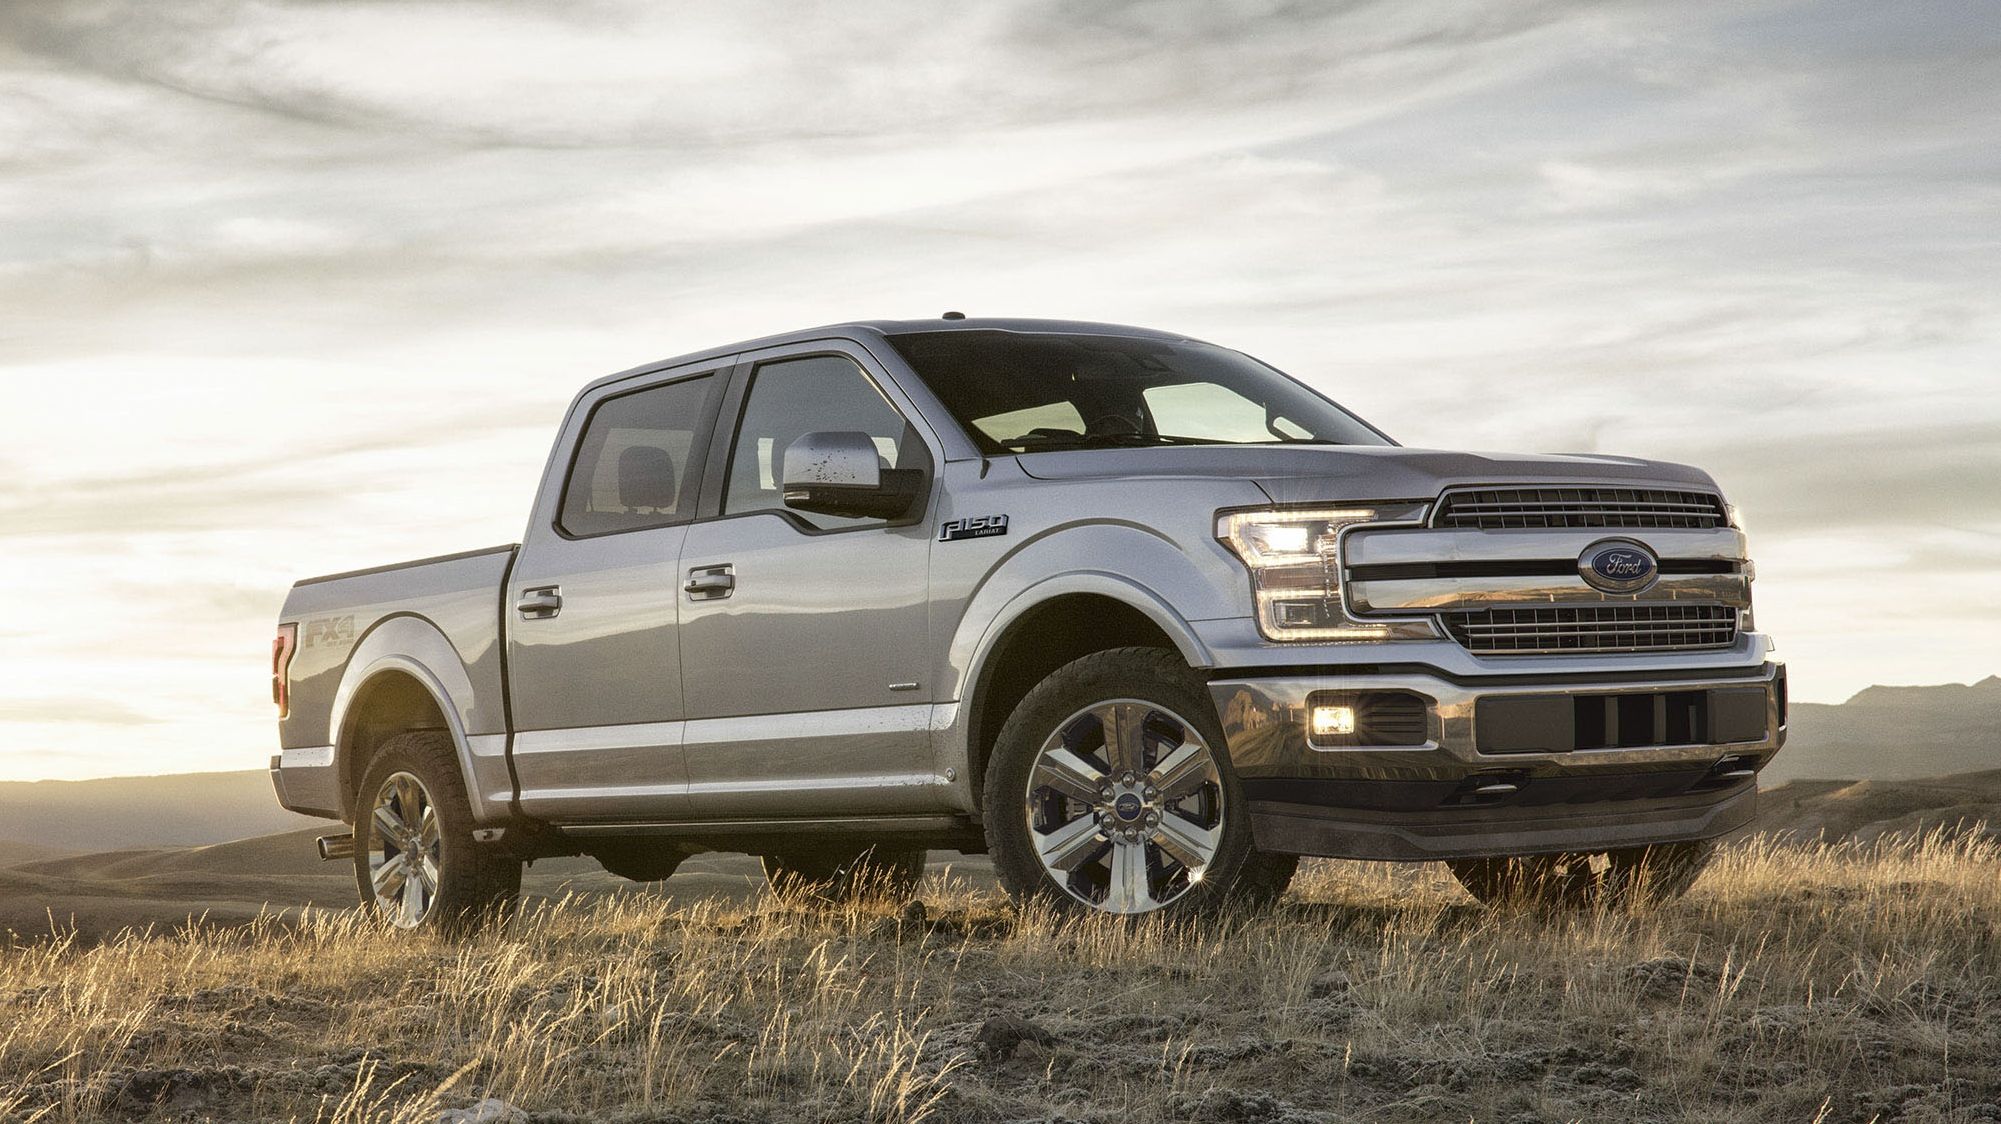 2018 5.0 Liter V-8 Ford F-150 in silver posing on off-road terrain